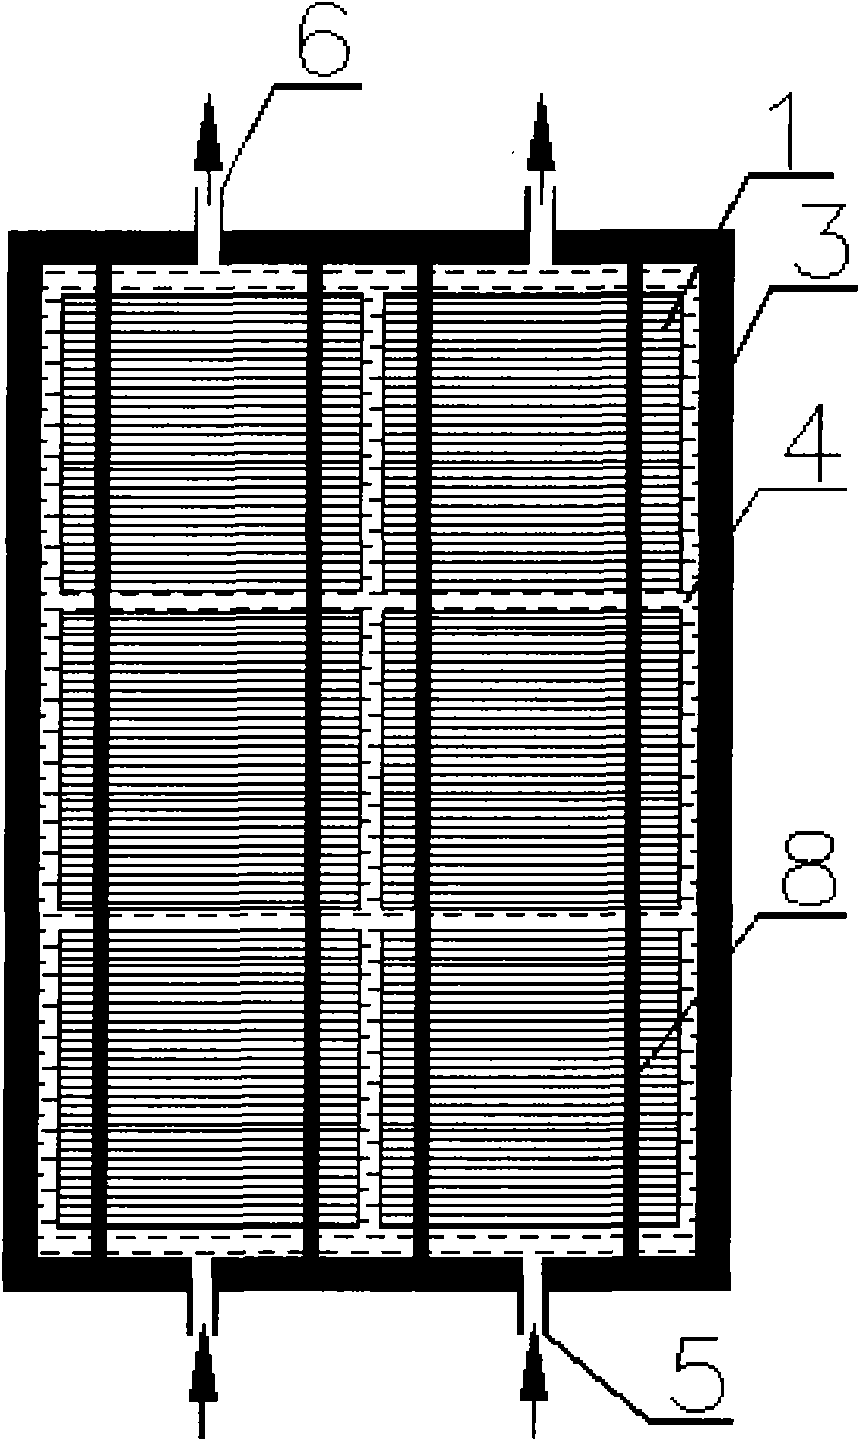 Liquid-immersed flat plate photovoltaic component